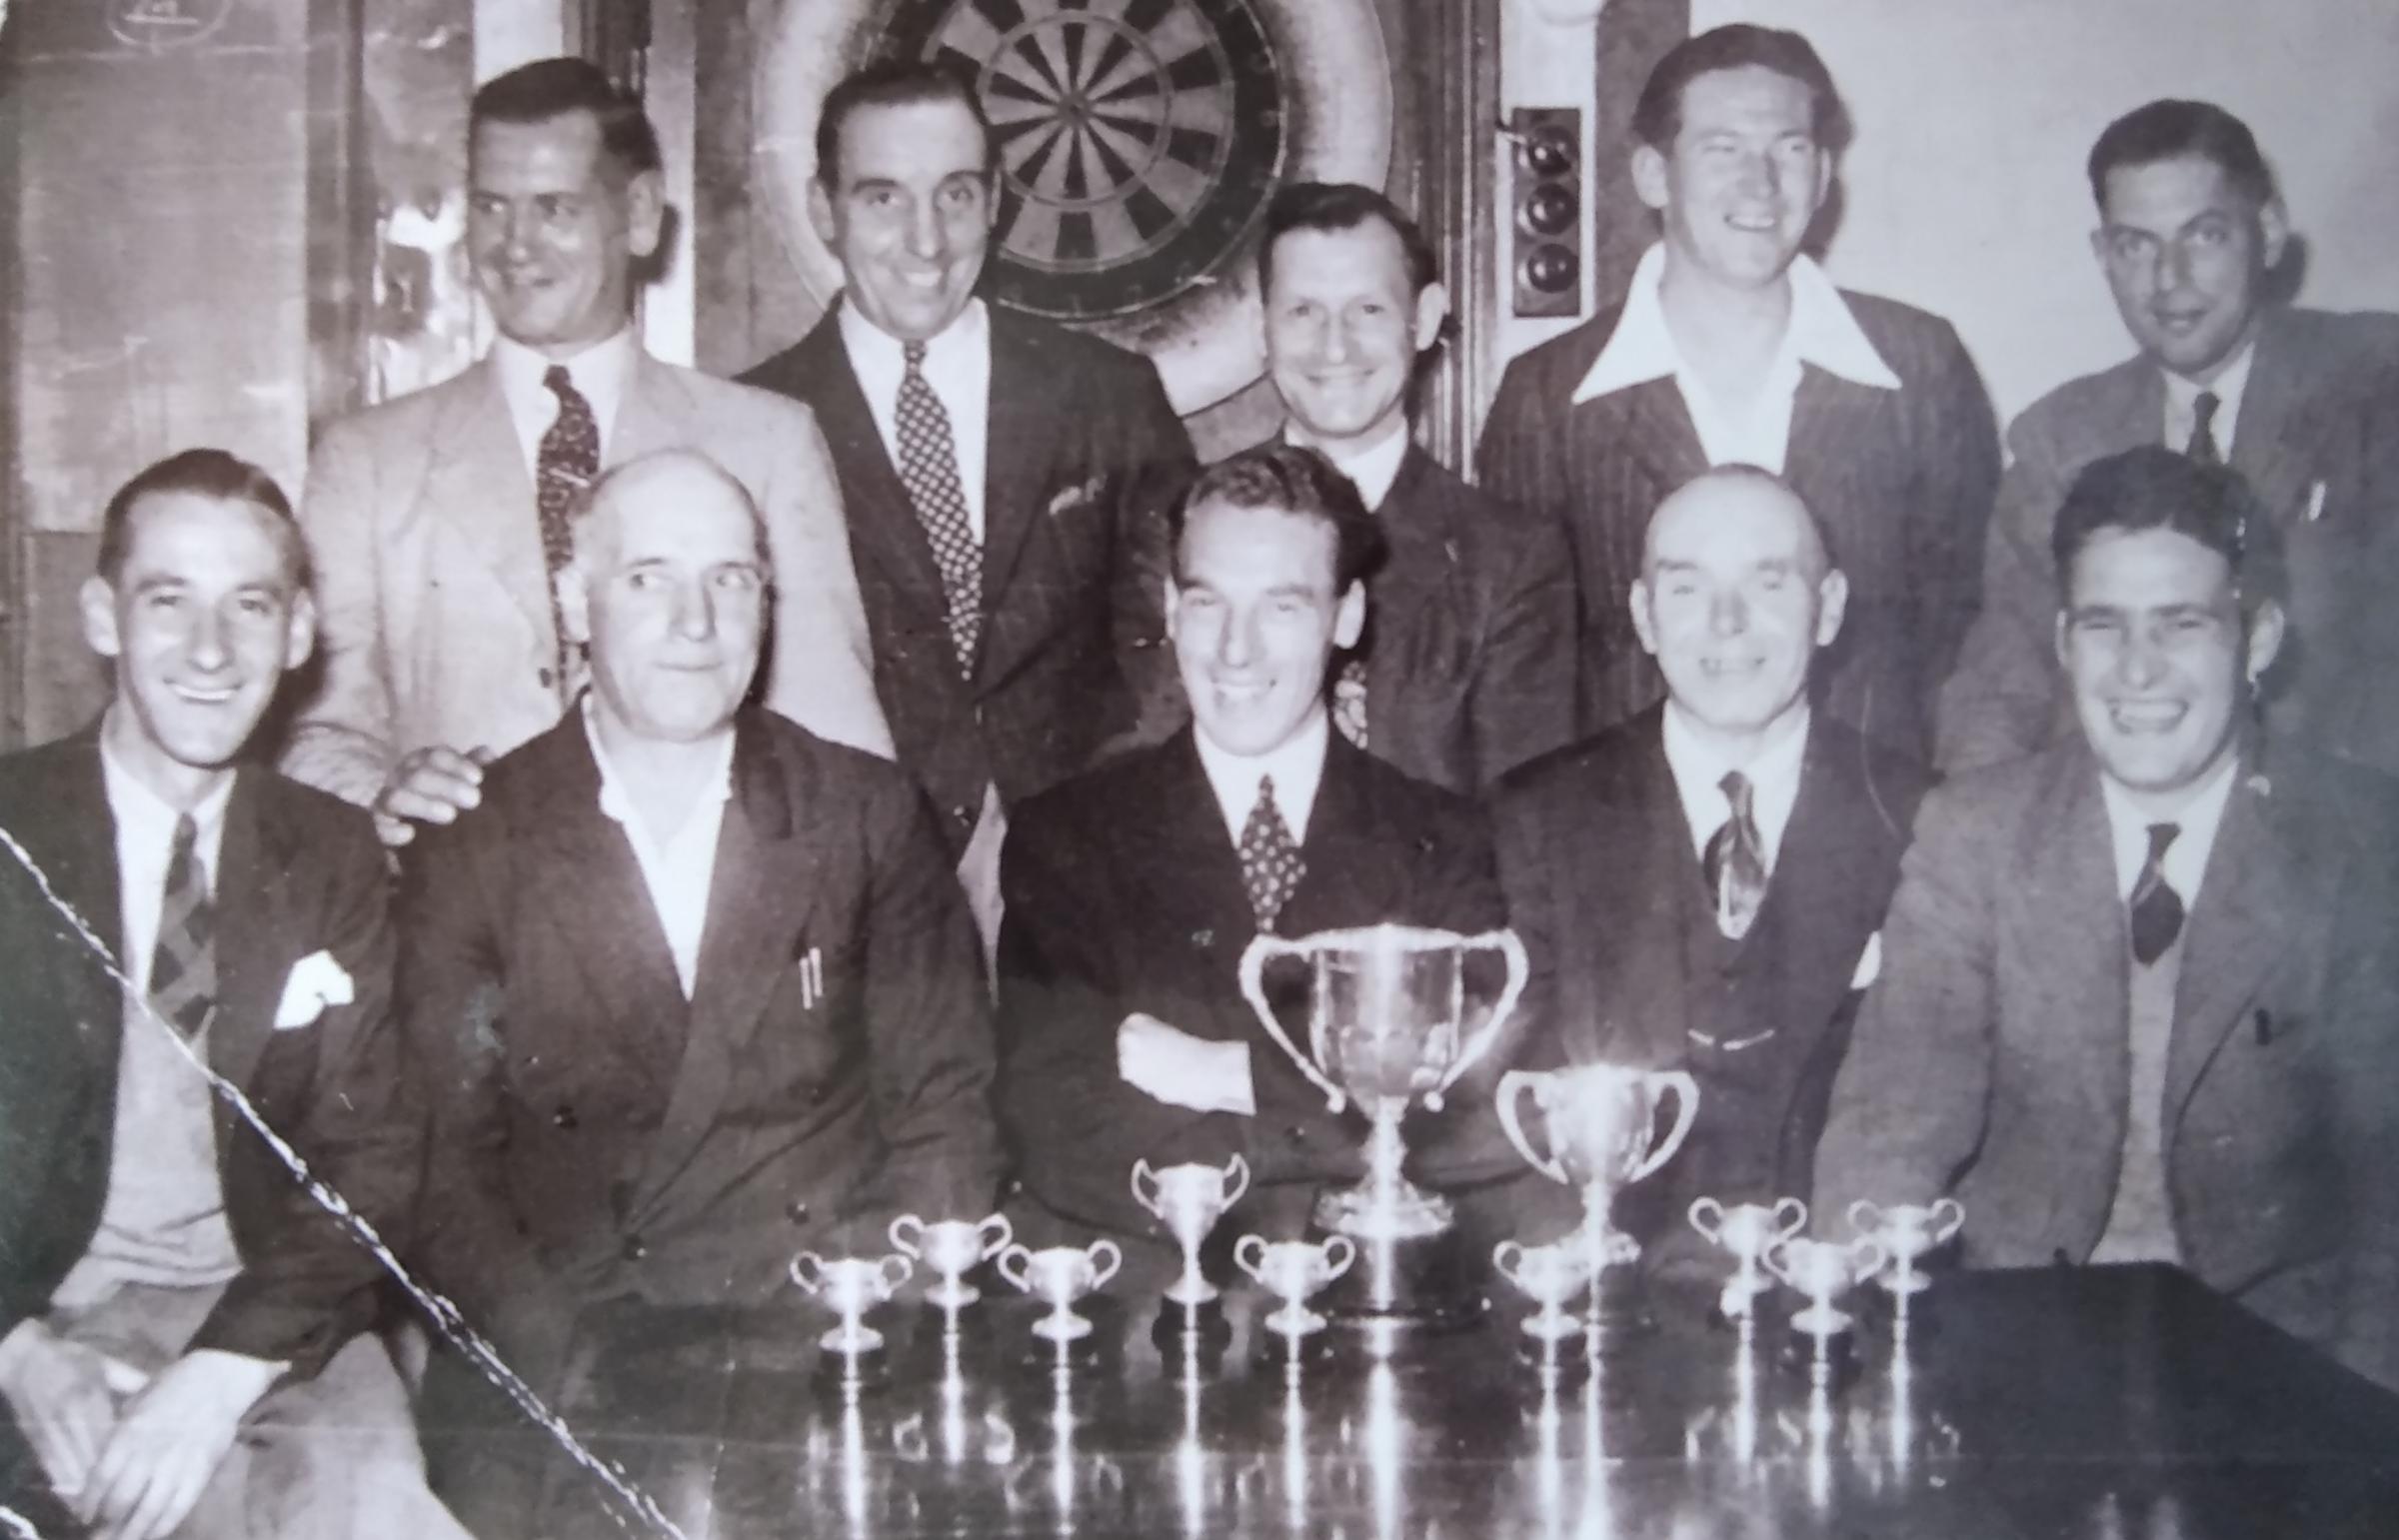 Arthur Reynolds’ daughter Vera went in this picture of the successful Crown Inn pub team, taken in 1950. Vera’s father is second left 